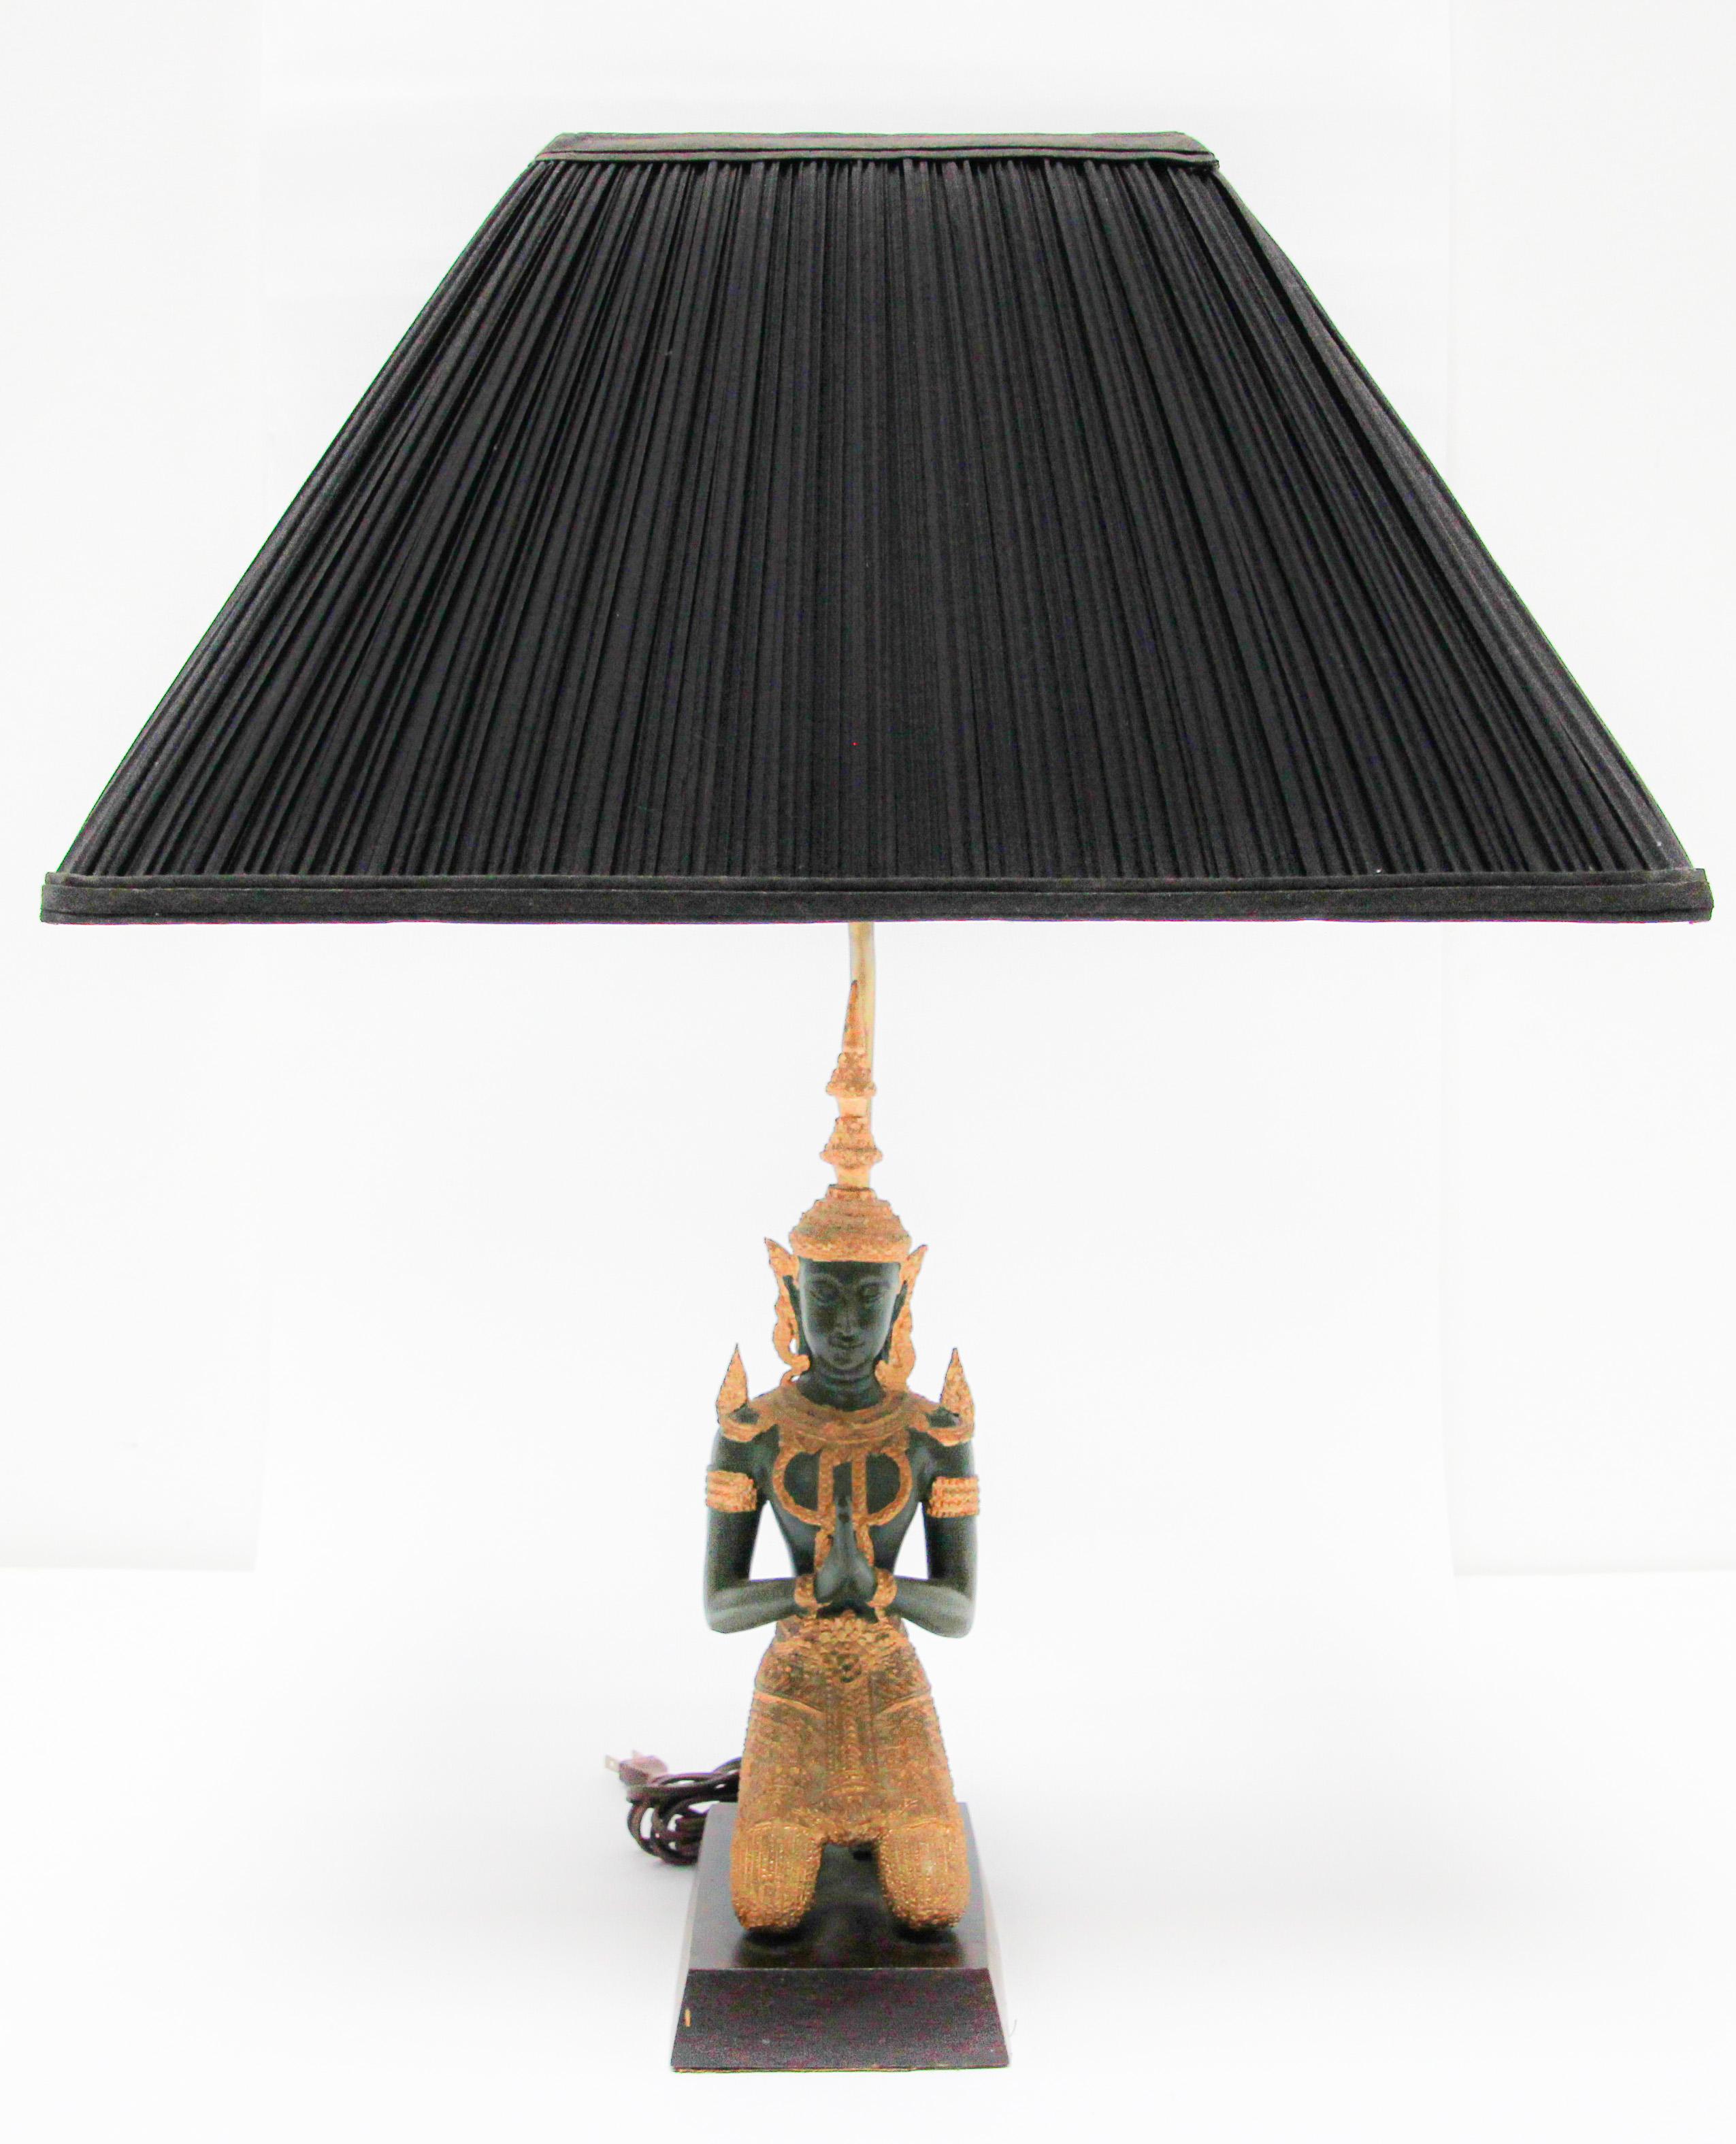 Bronze statue of a Thai Teppanom kneeling Angel Buddha made into a table lamp.
Intricate bronze Thai Teppanom Kneeling Angel Buddha sculpture dark green with gold leaf detailing. 
Thai gilt hand cast Buddha figure lamp, circa 1940.
This bronze